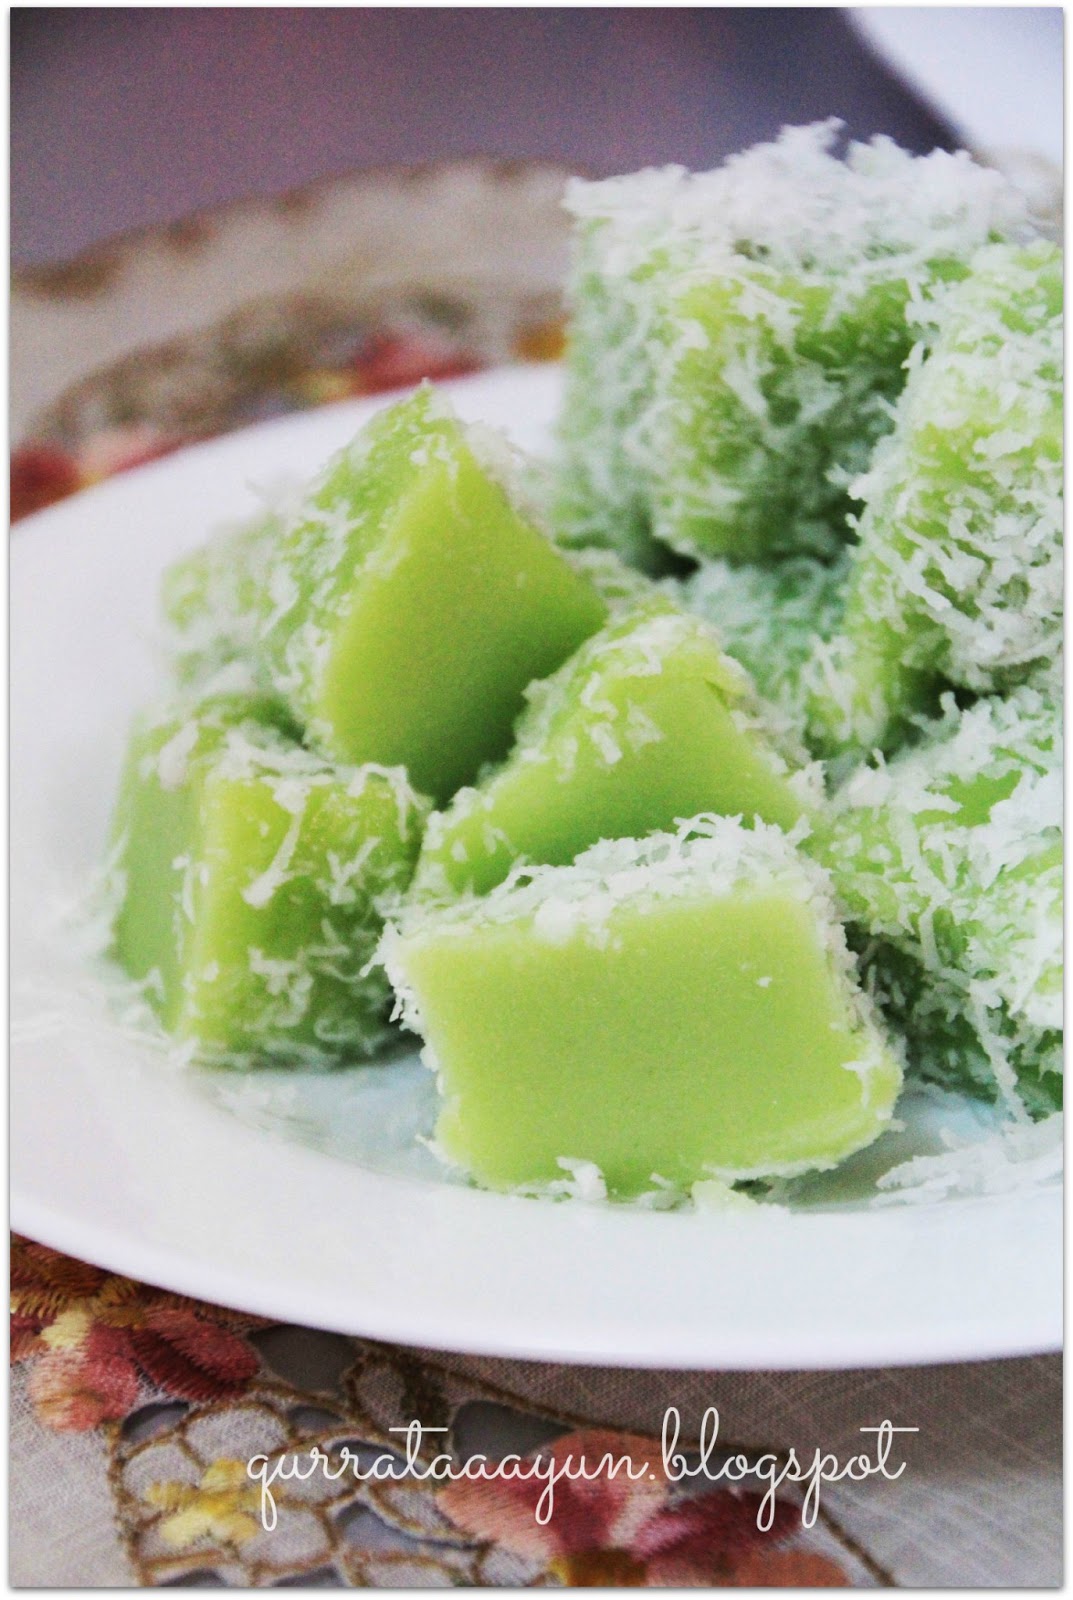 Life is a Constant Battle: 4 Ramadhan 1434H: Kuih Kaswi 